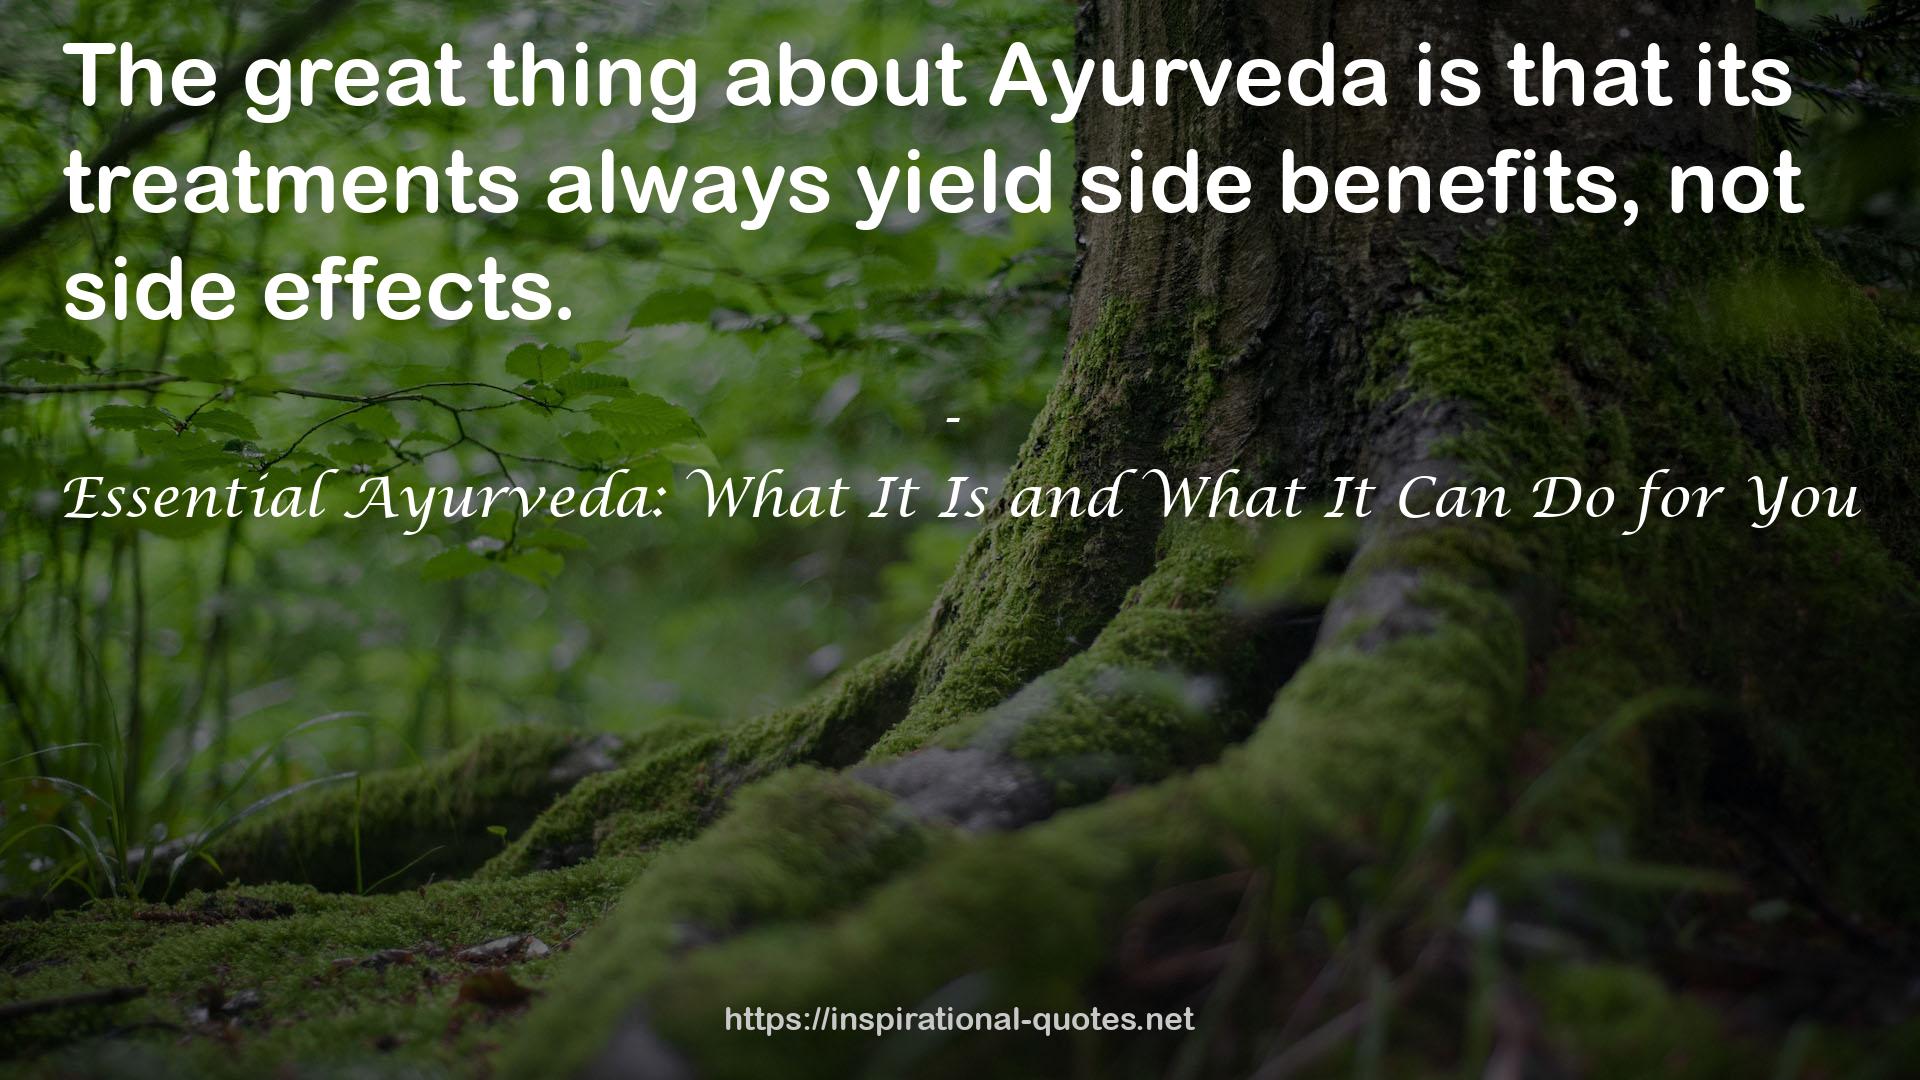 Essential Ayurveda: What It Is and What It Can Do for You QUOTES